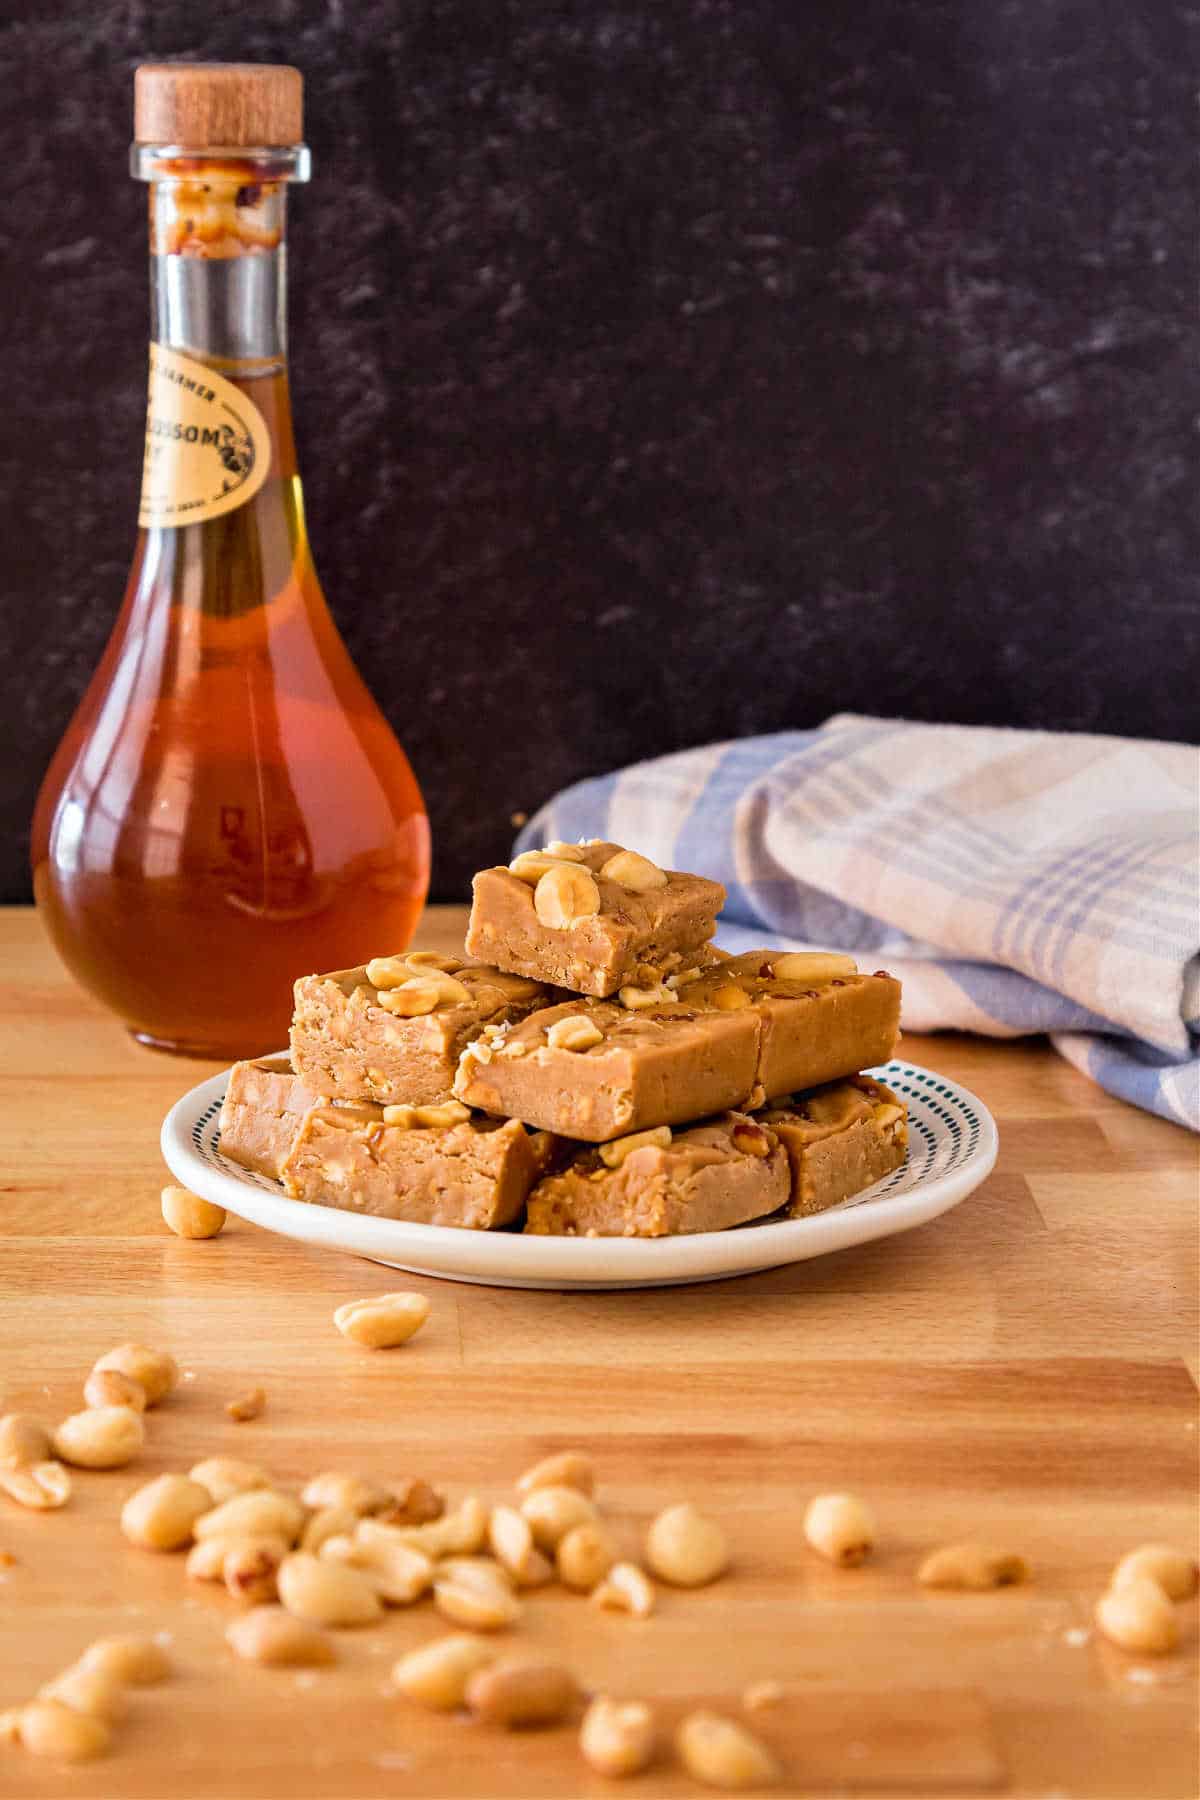 A small plate with a pile of peanut butter fudge on it. There's a jar of honey in the background and peanuts scattered in front of the plate.